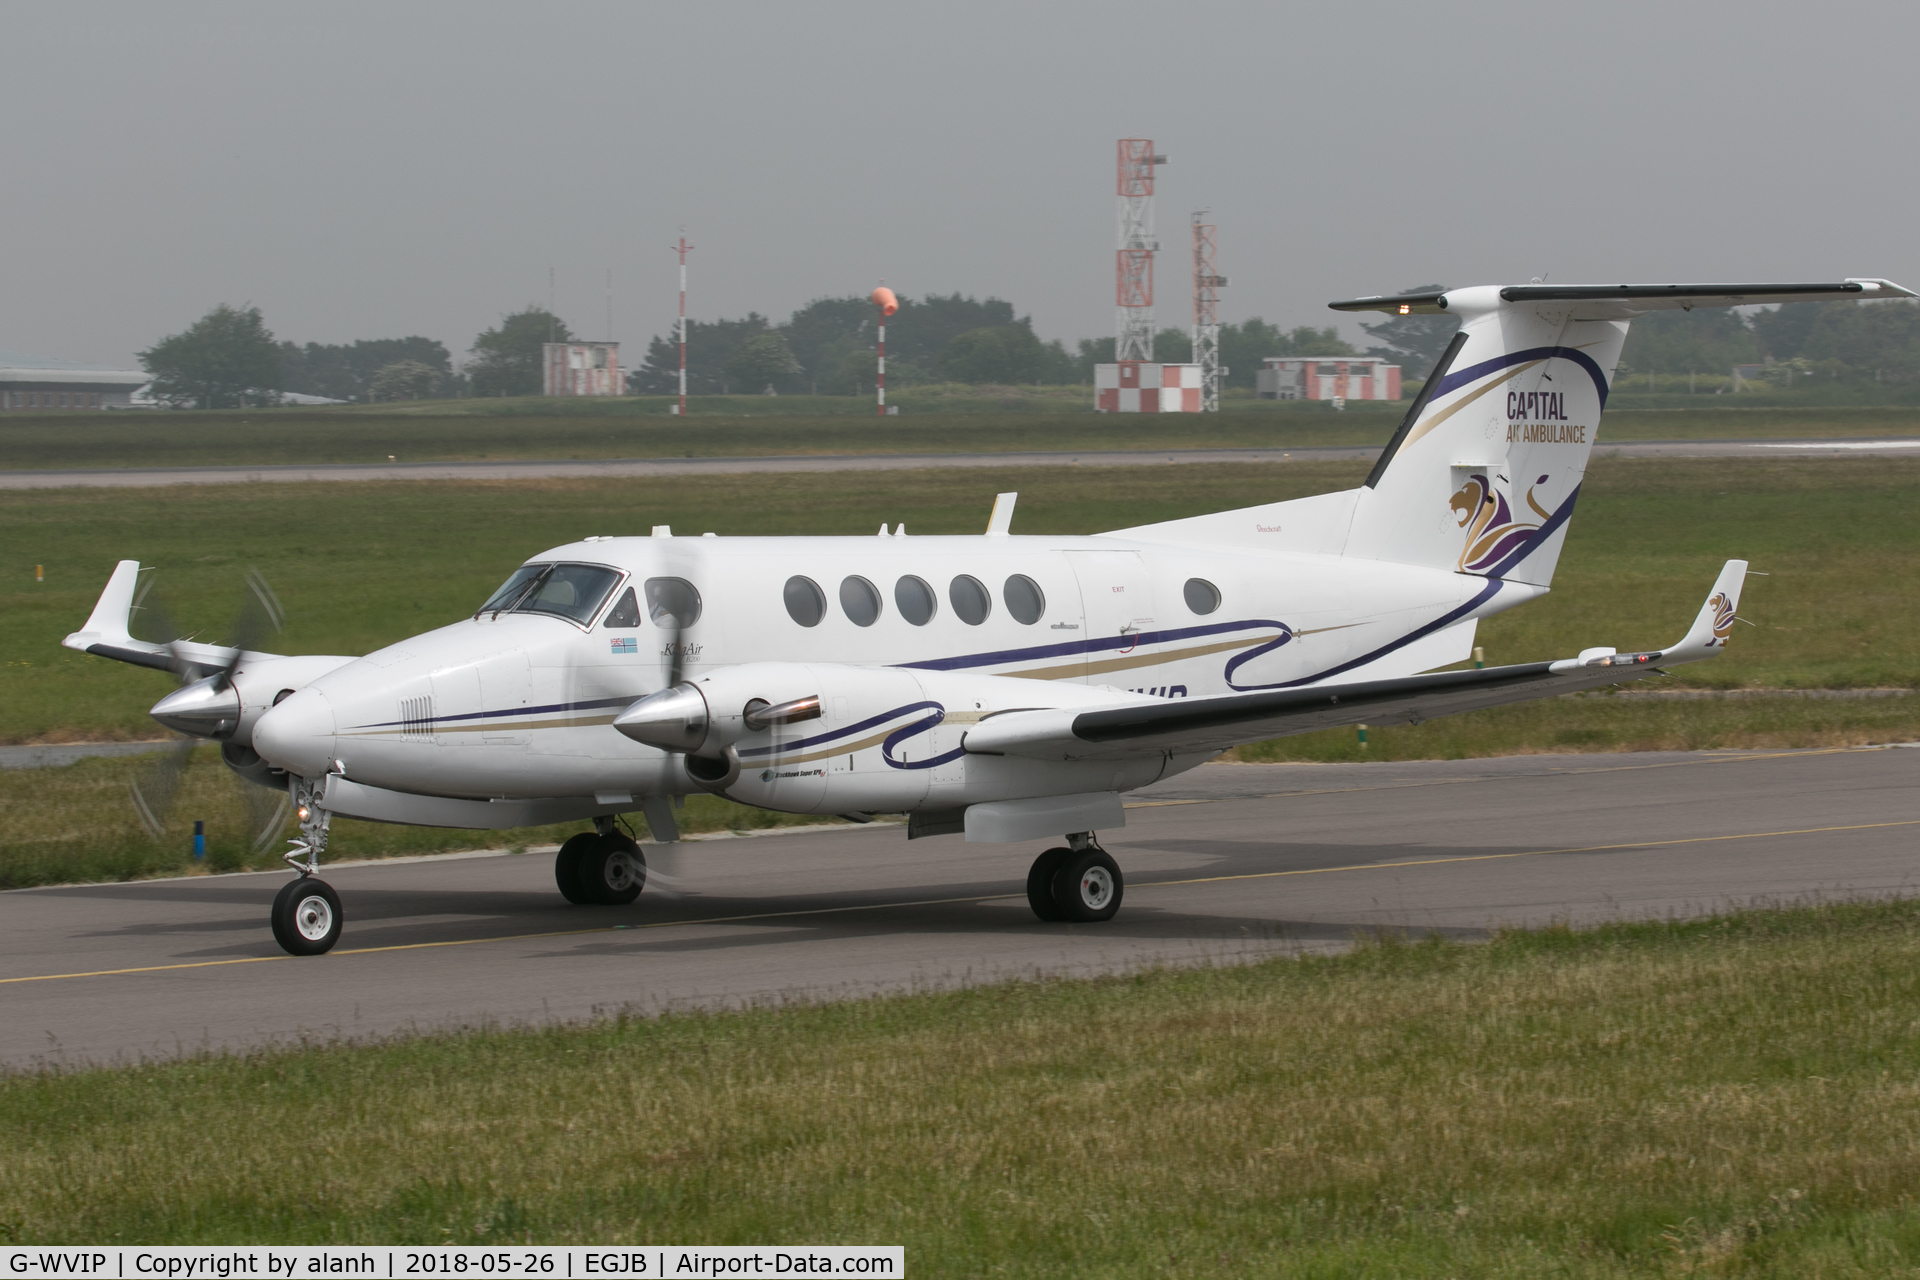 G-WVIP, 1980 Beech 200 Super King Air C/N BB-625, Taxiing for departure at Guernsey; note the Capital Air Ambulance title and logo on the tail